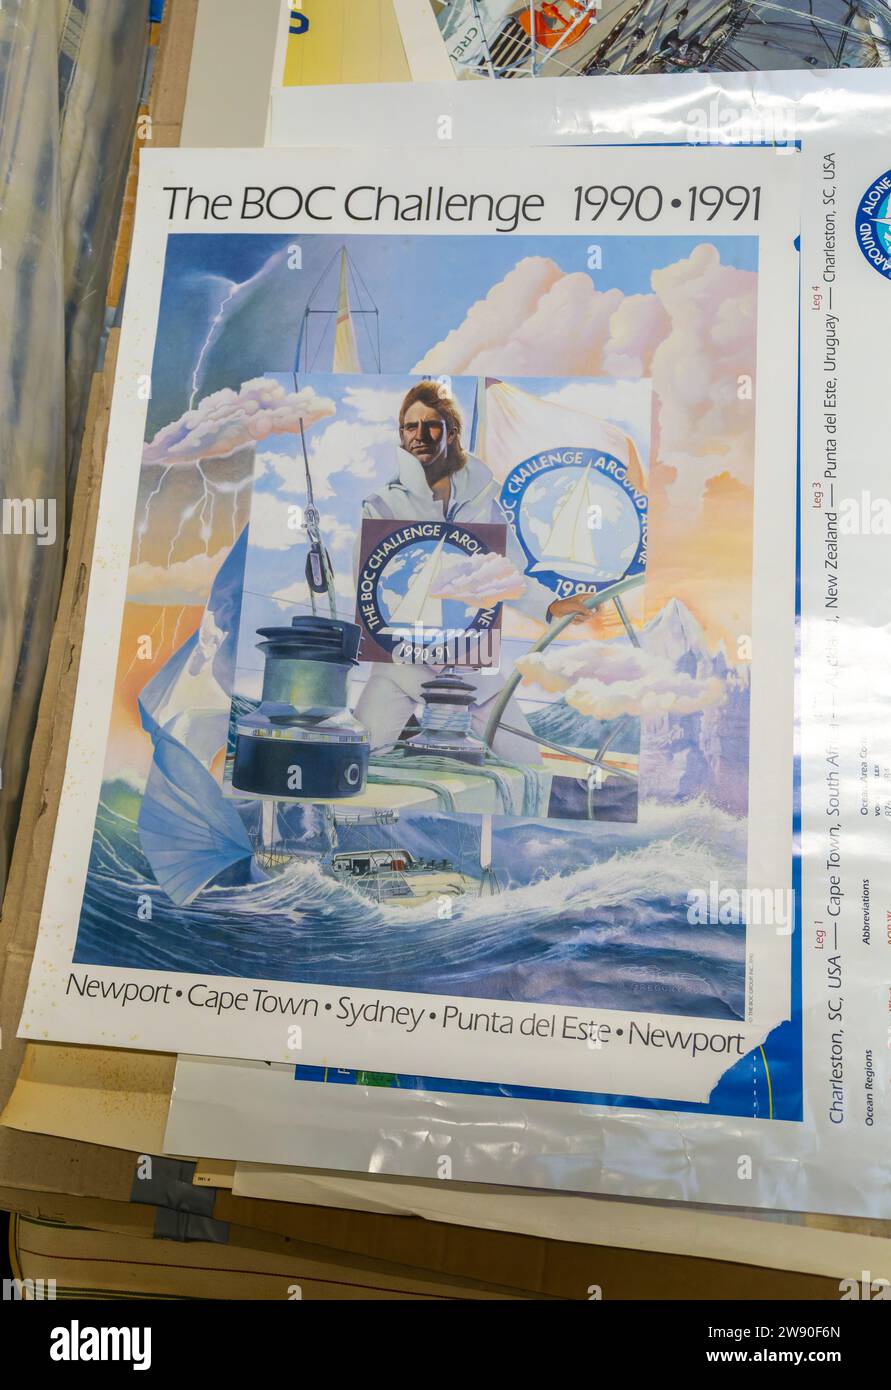 Pile of vintage posters on sale at auction - Poster for The BOC Challenge 1990-1991 around the world sailing event Stock Photo